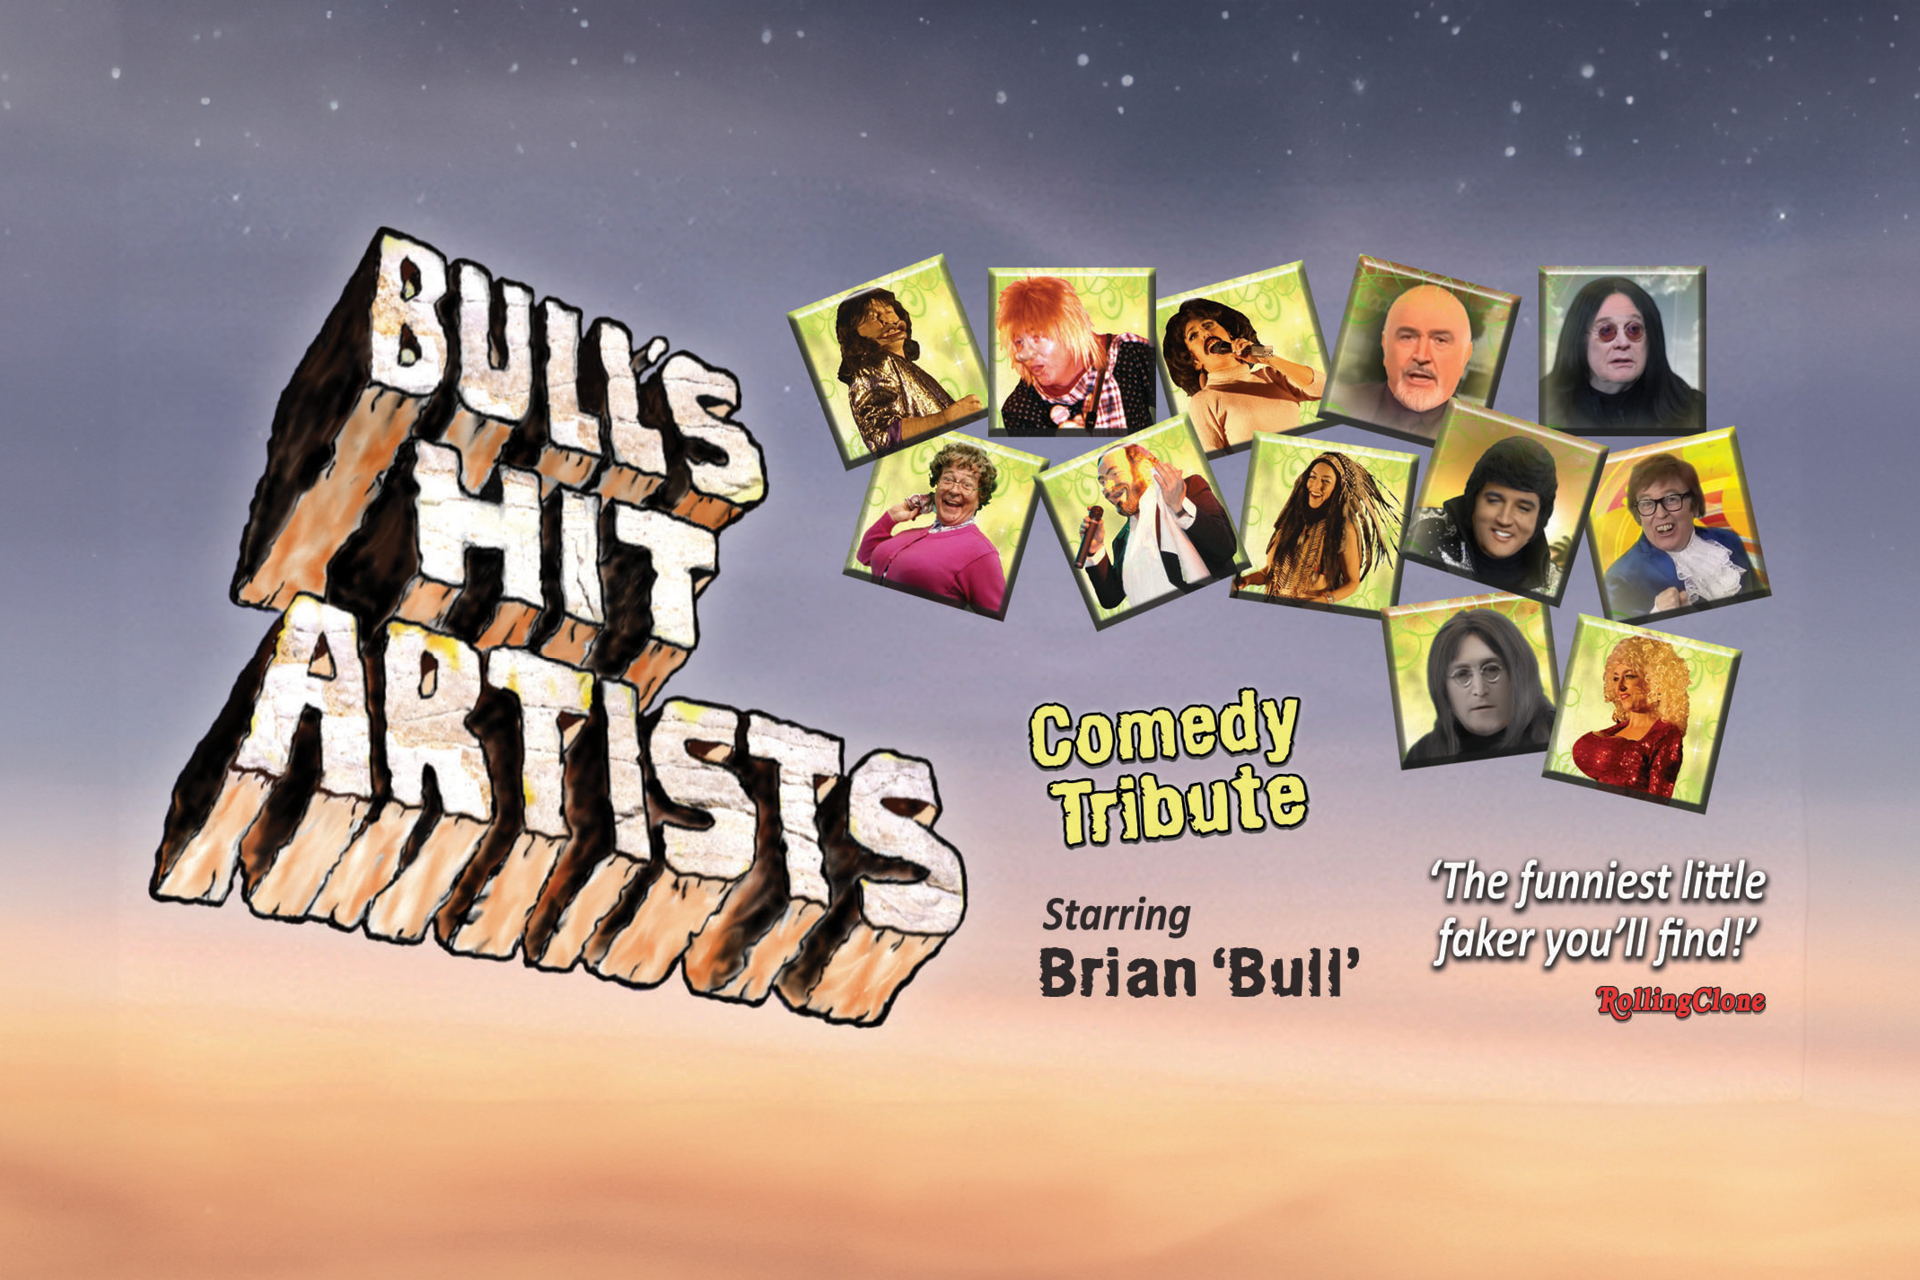 Bull's Hit Artists - Comedy Tribute